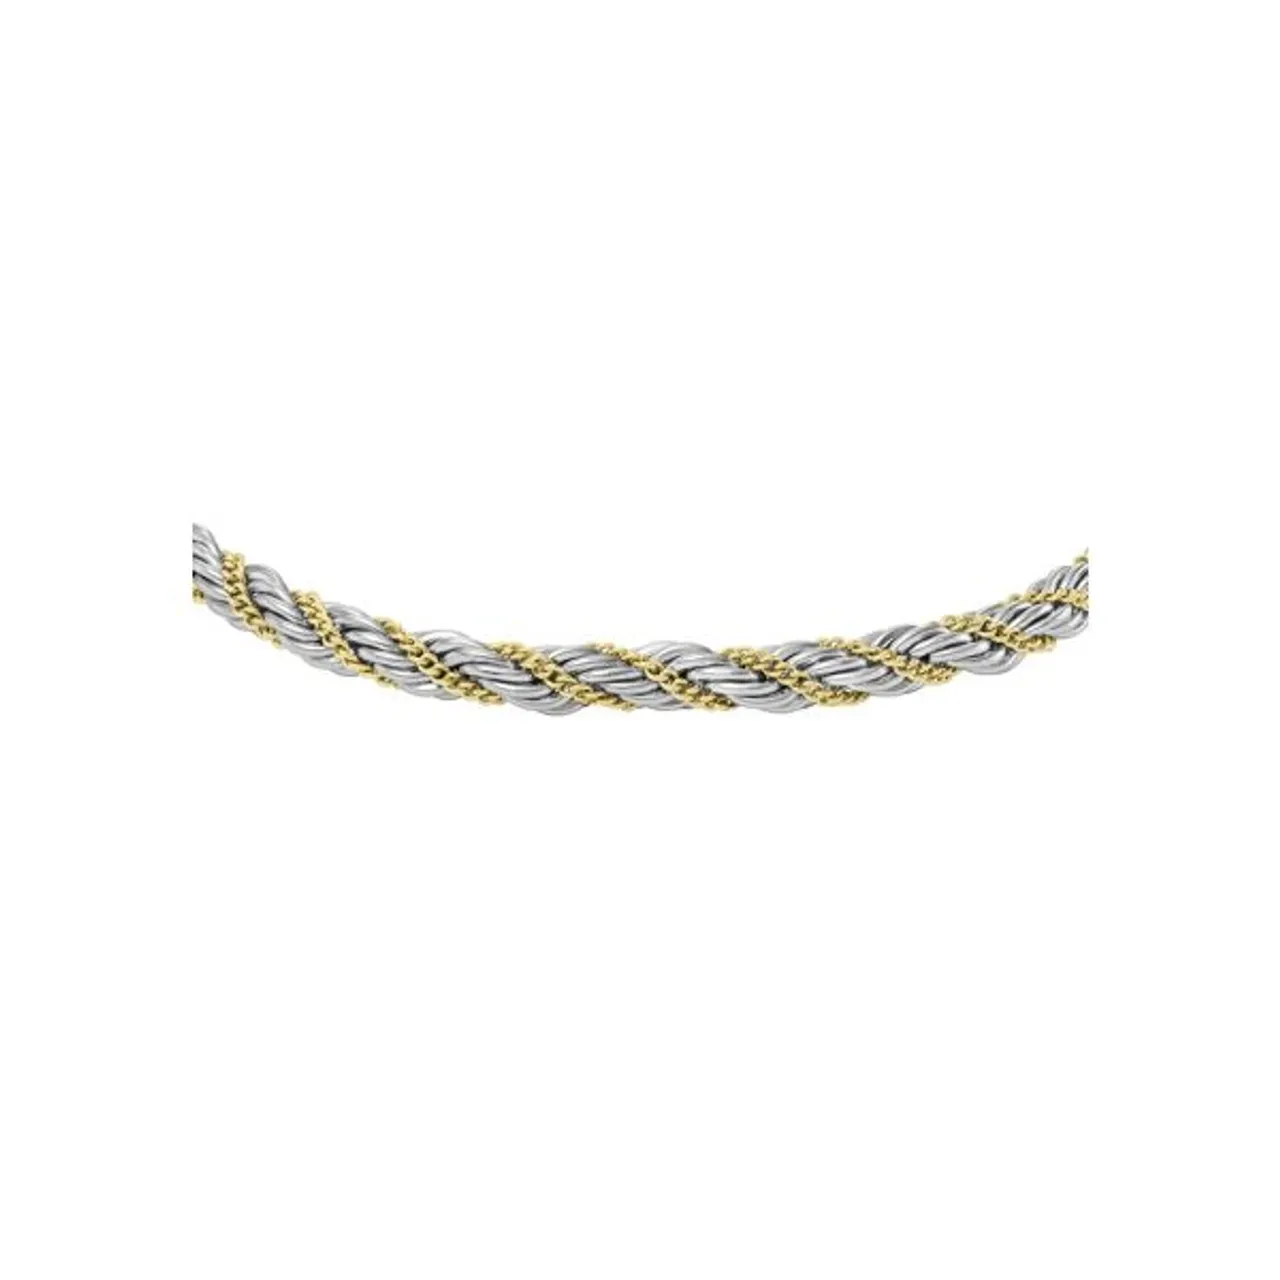 Edelstahlarmband FOSSIL "JEWELRY BOLD CHAINS TWO-TONE, JF04607998" Armbänder Gr. Edelstahl, goldfarben (edelstahlfarben, gelbgoldfarben) Damen Edelsta...